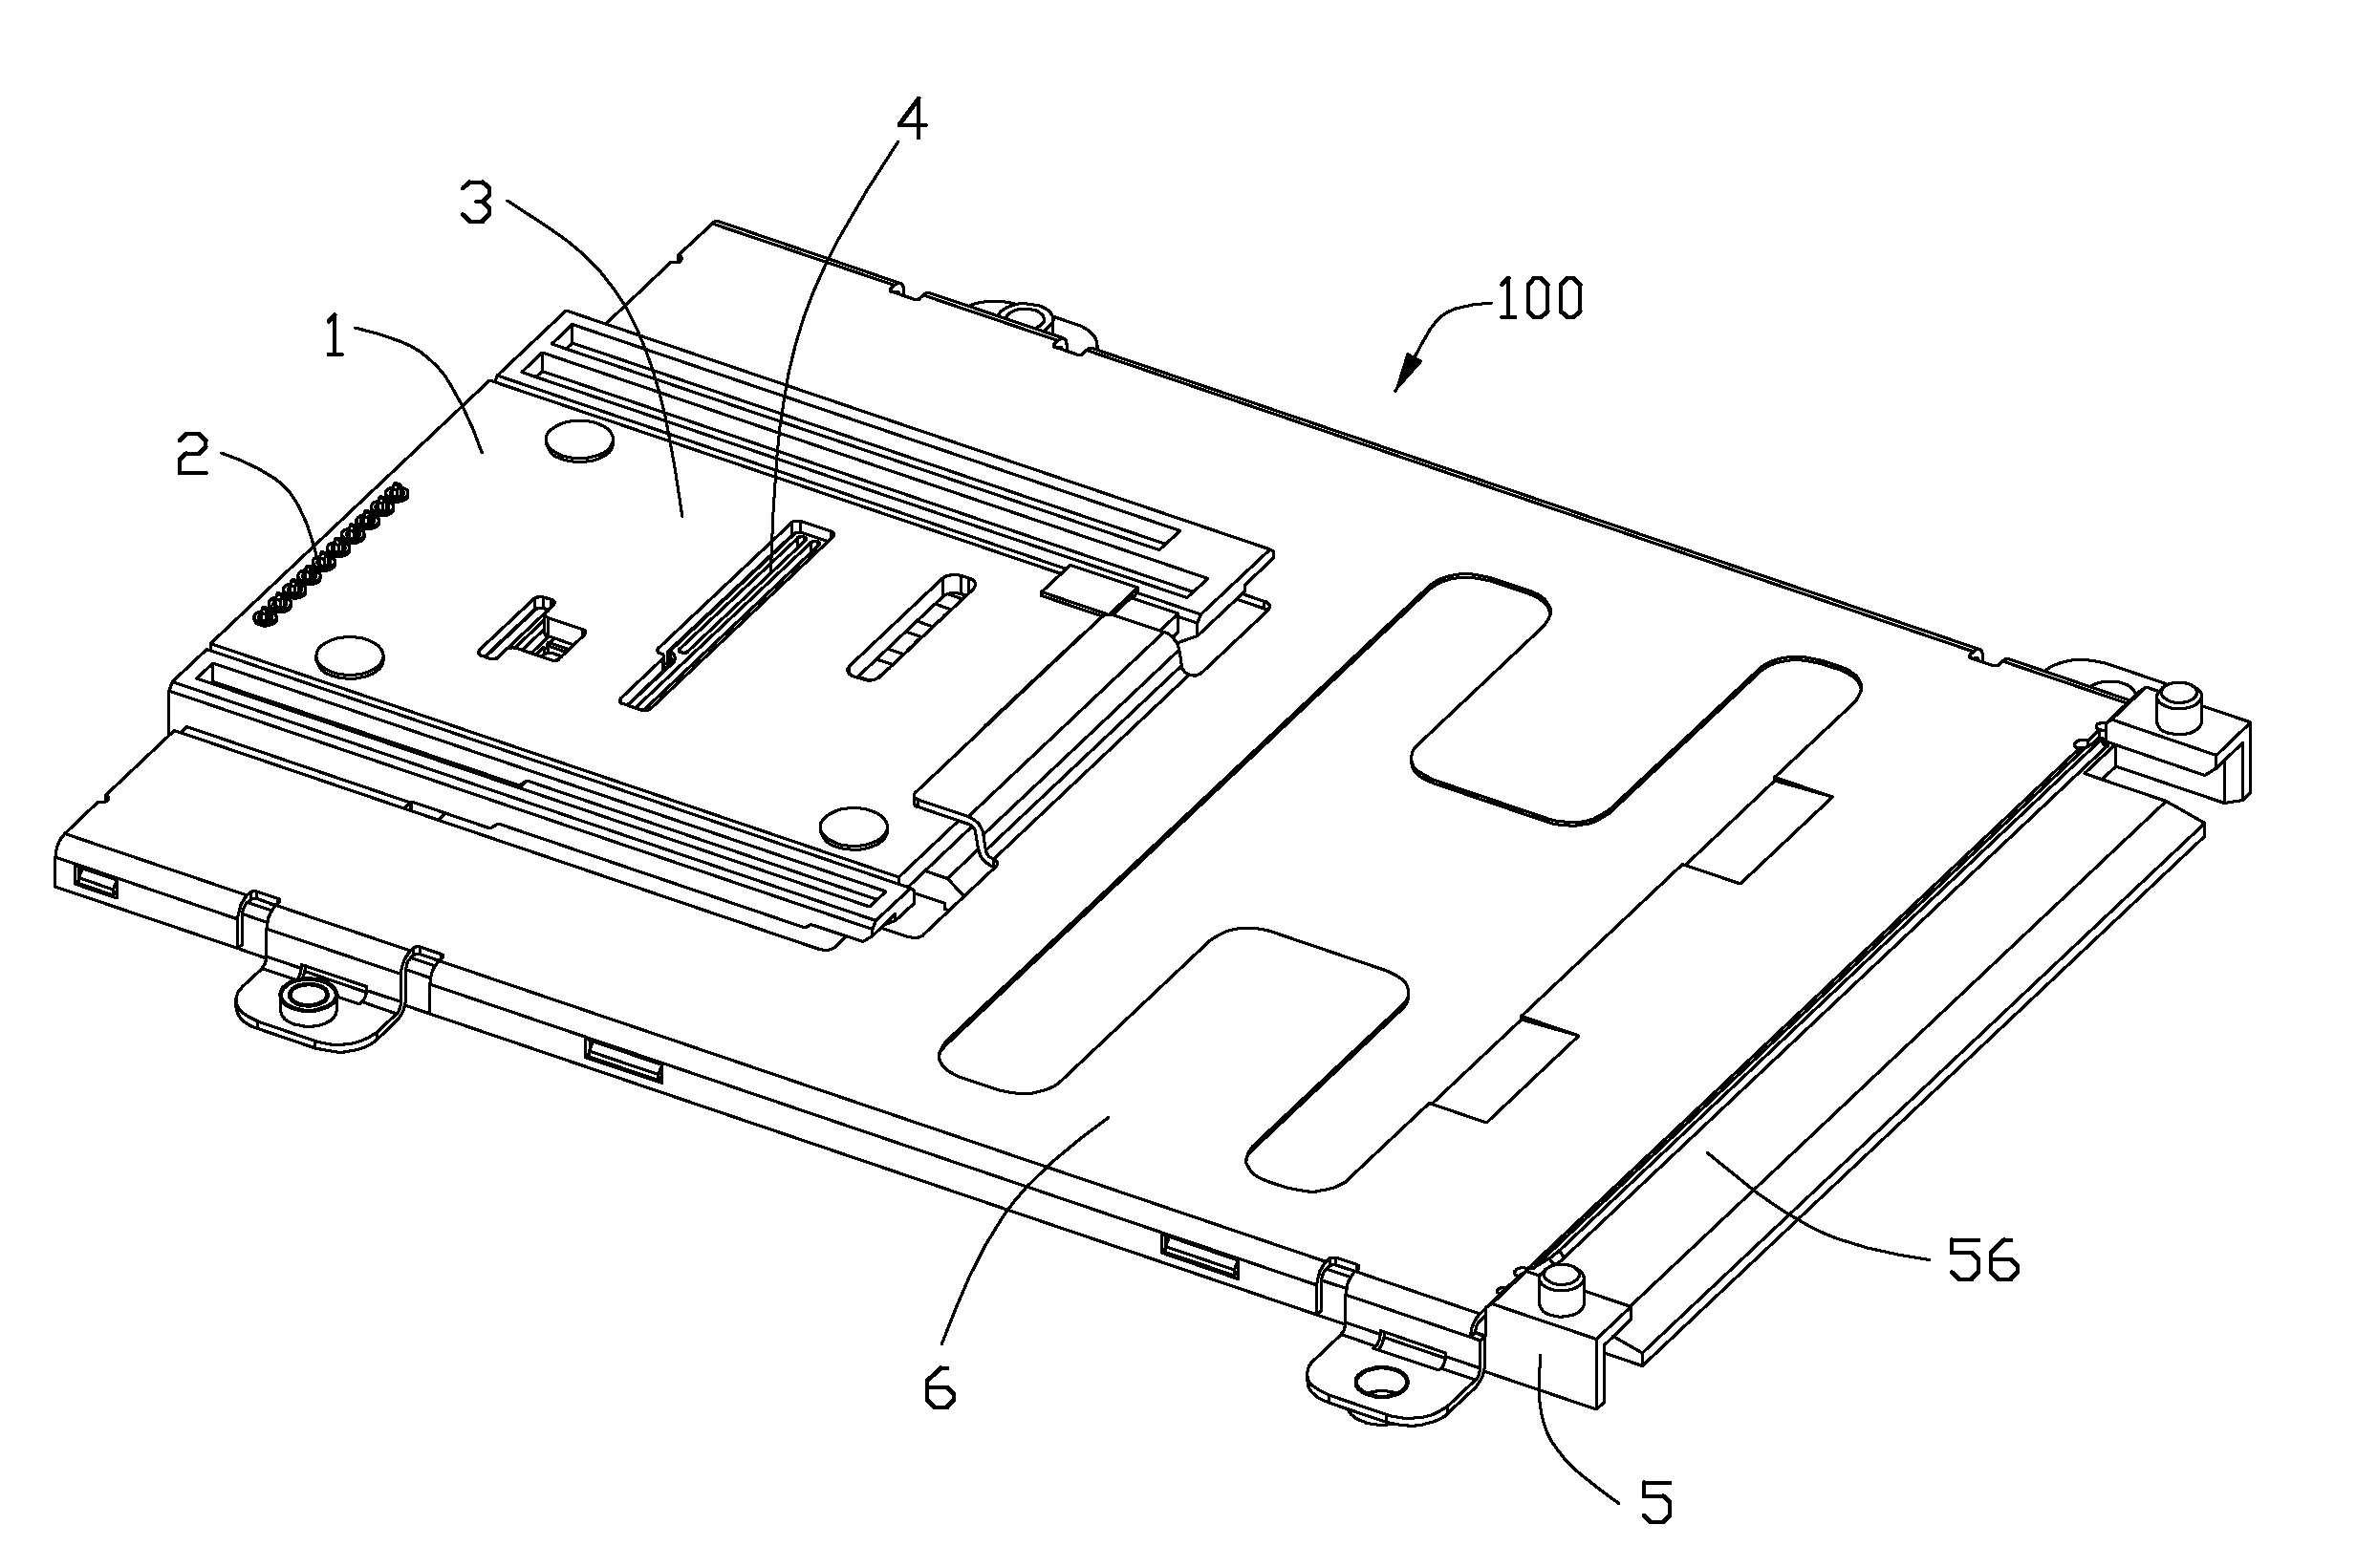 Electrical card connector with improved contacts arrangement